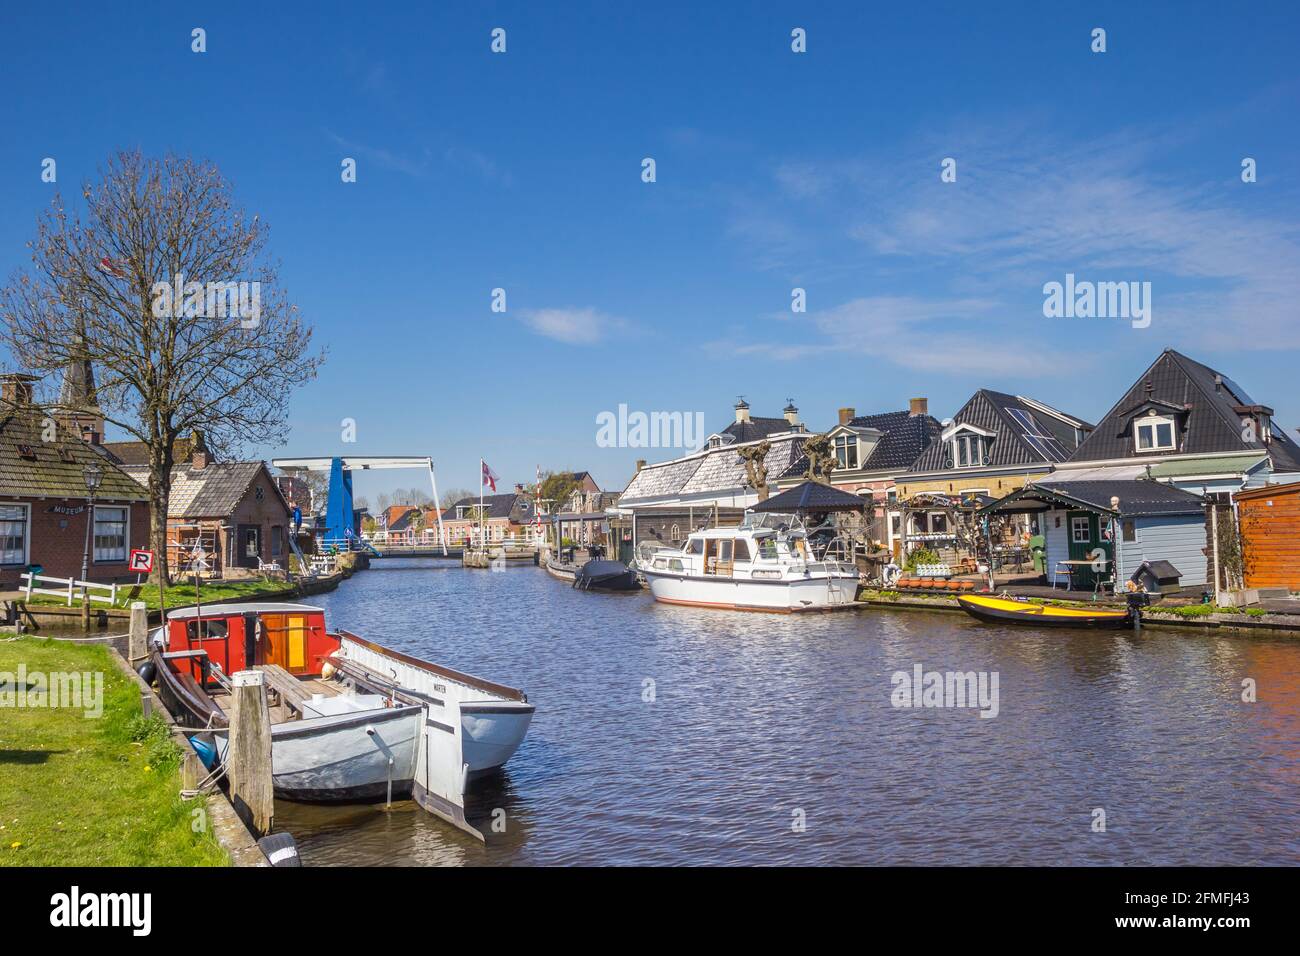 Boats in the central canal of small town Warten, Netherlands Stock Photo